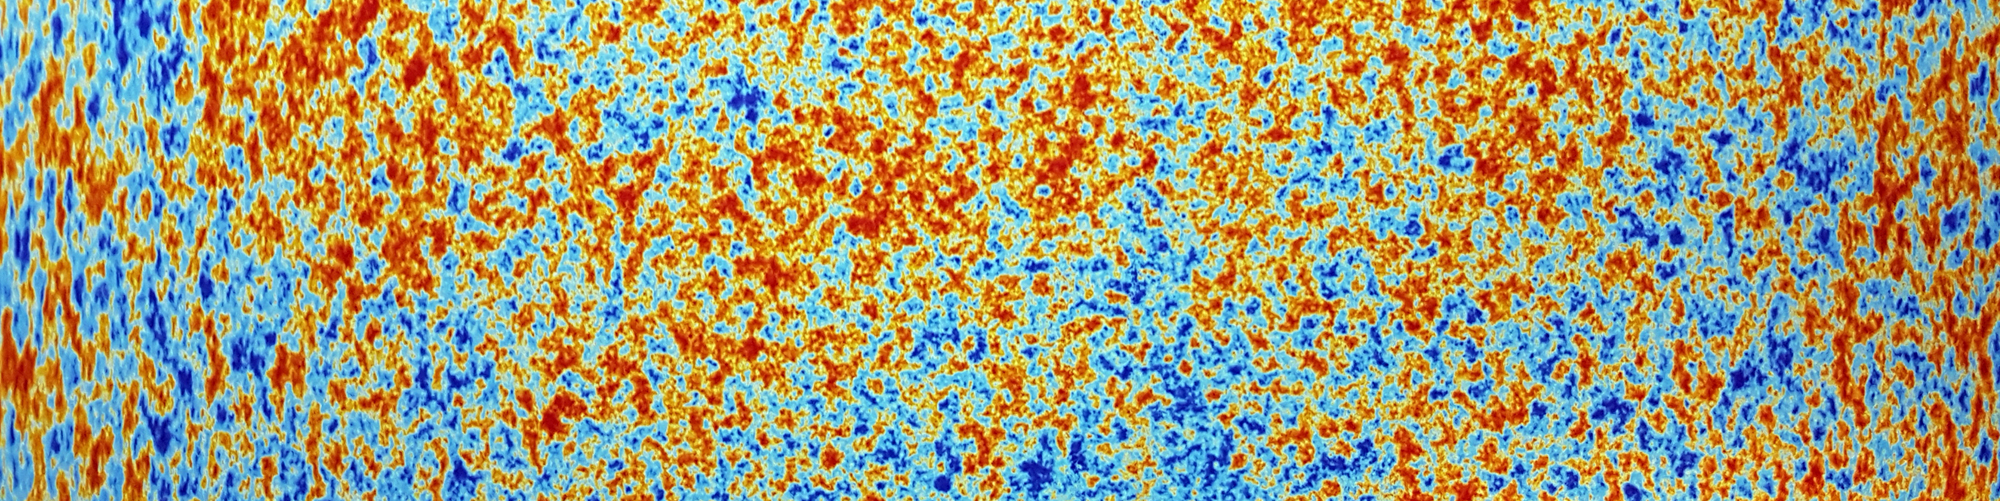 A depiction of the Cosmic Microwave Background, variegated orange and blue